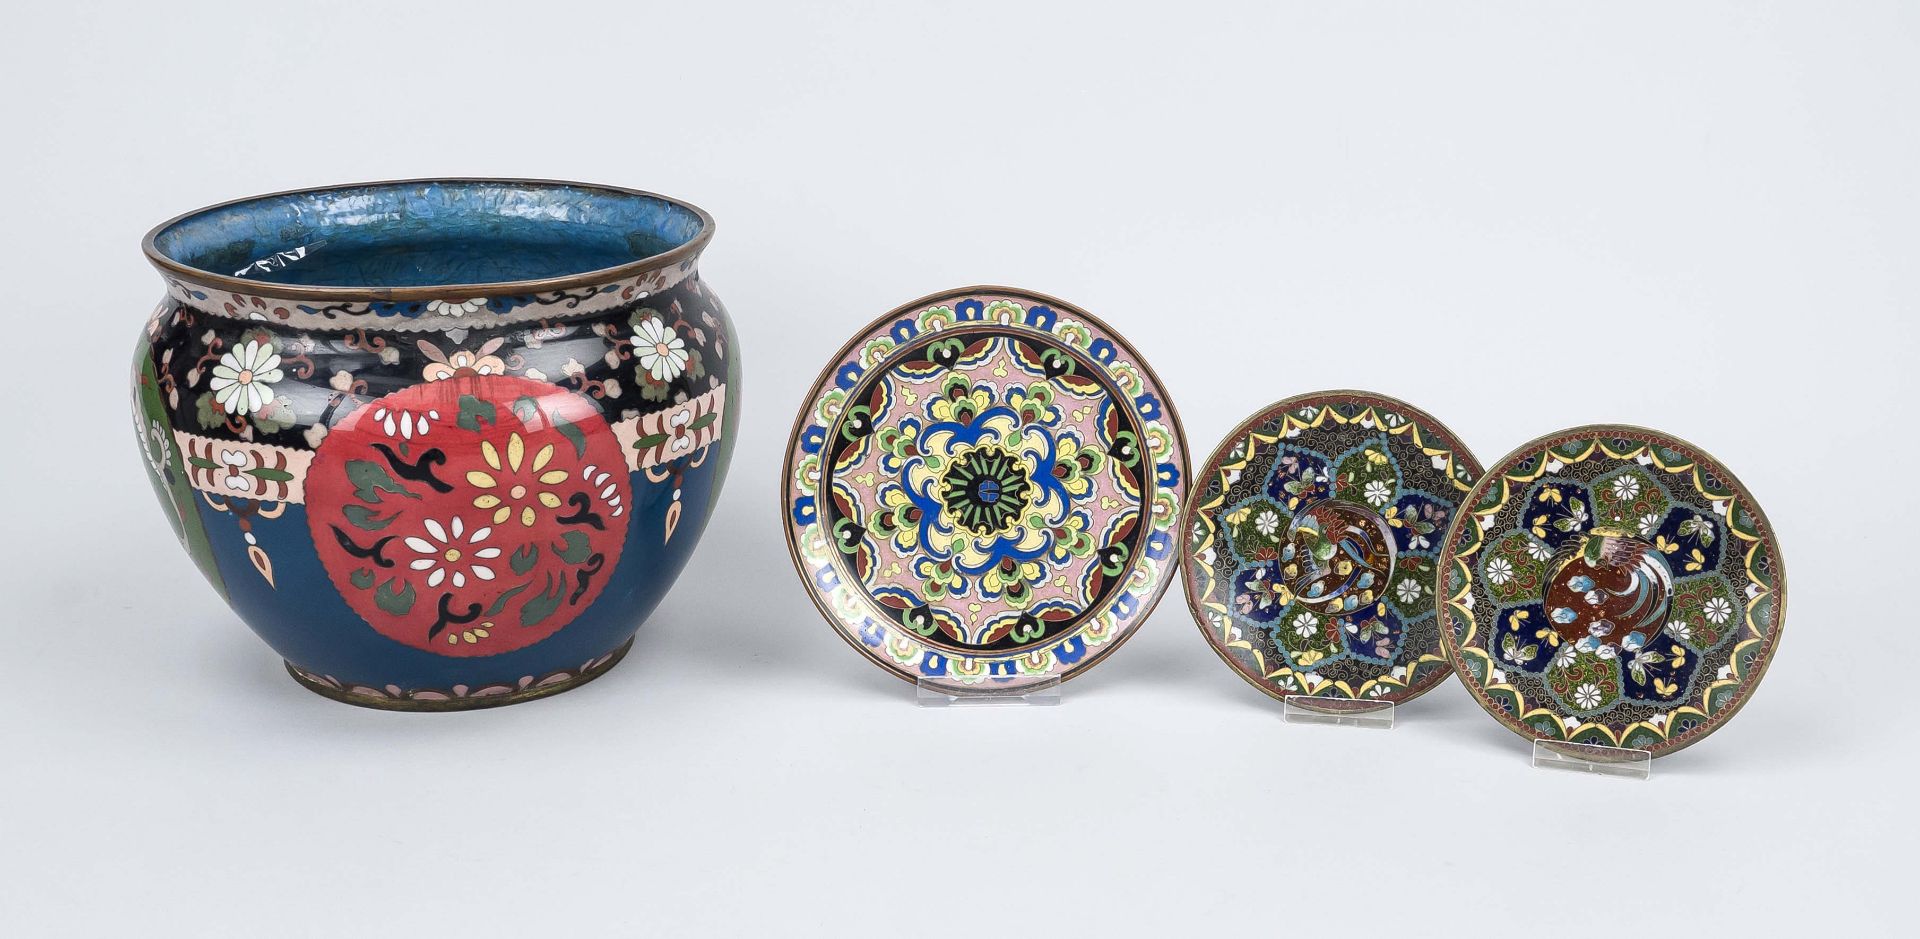 4 pieces Cloisonné, Japan, late 19th century (Meiji). 1 x cachepot, rubbed and slightly chipped,